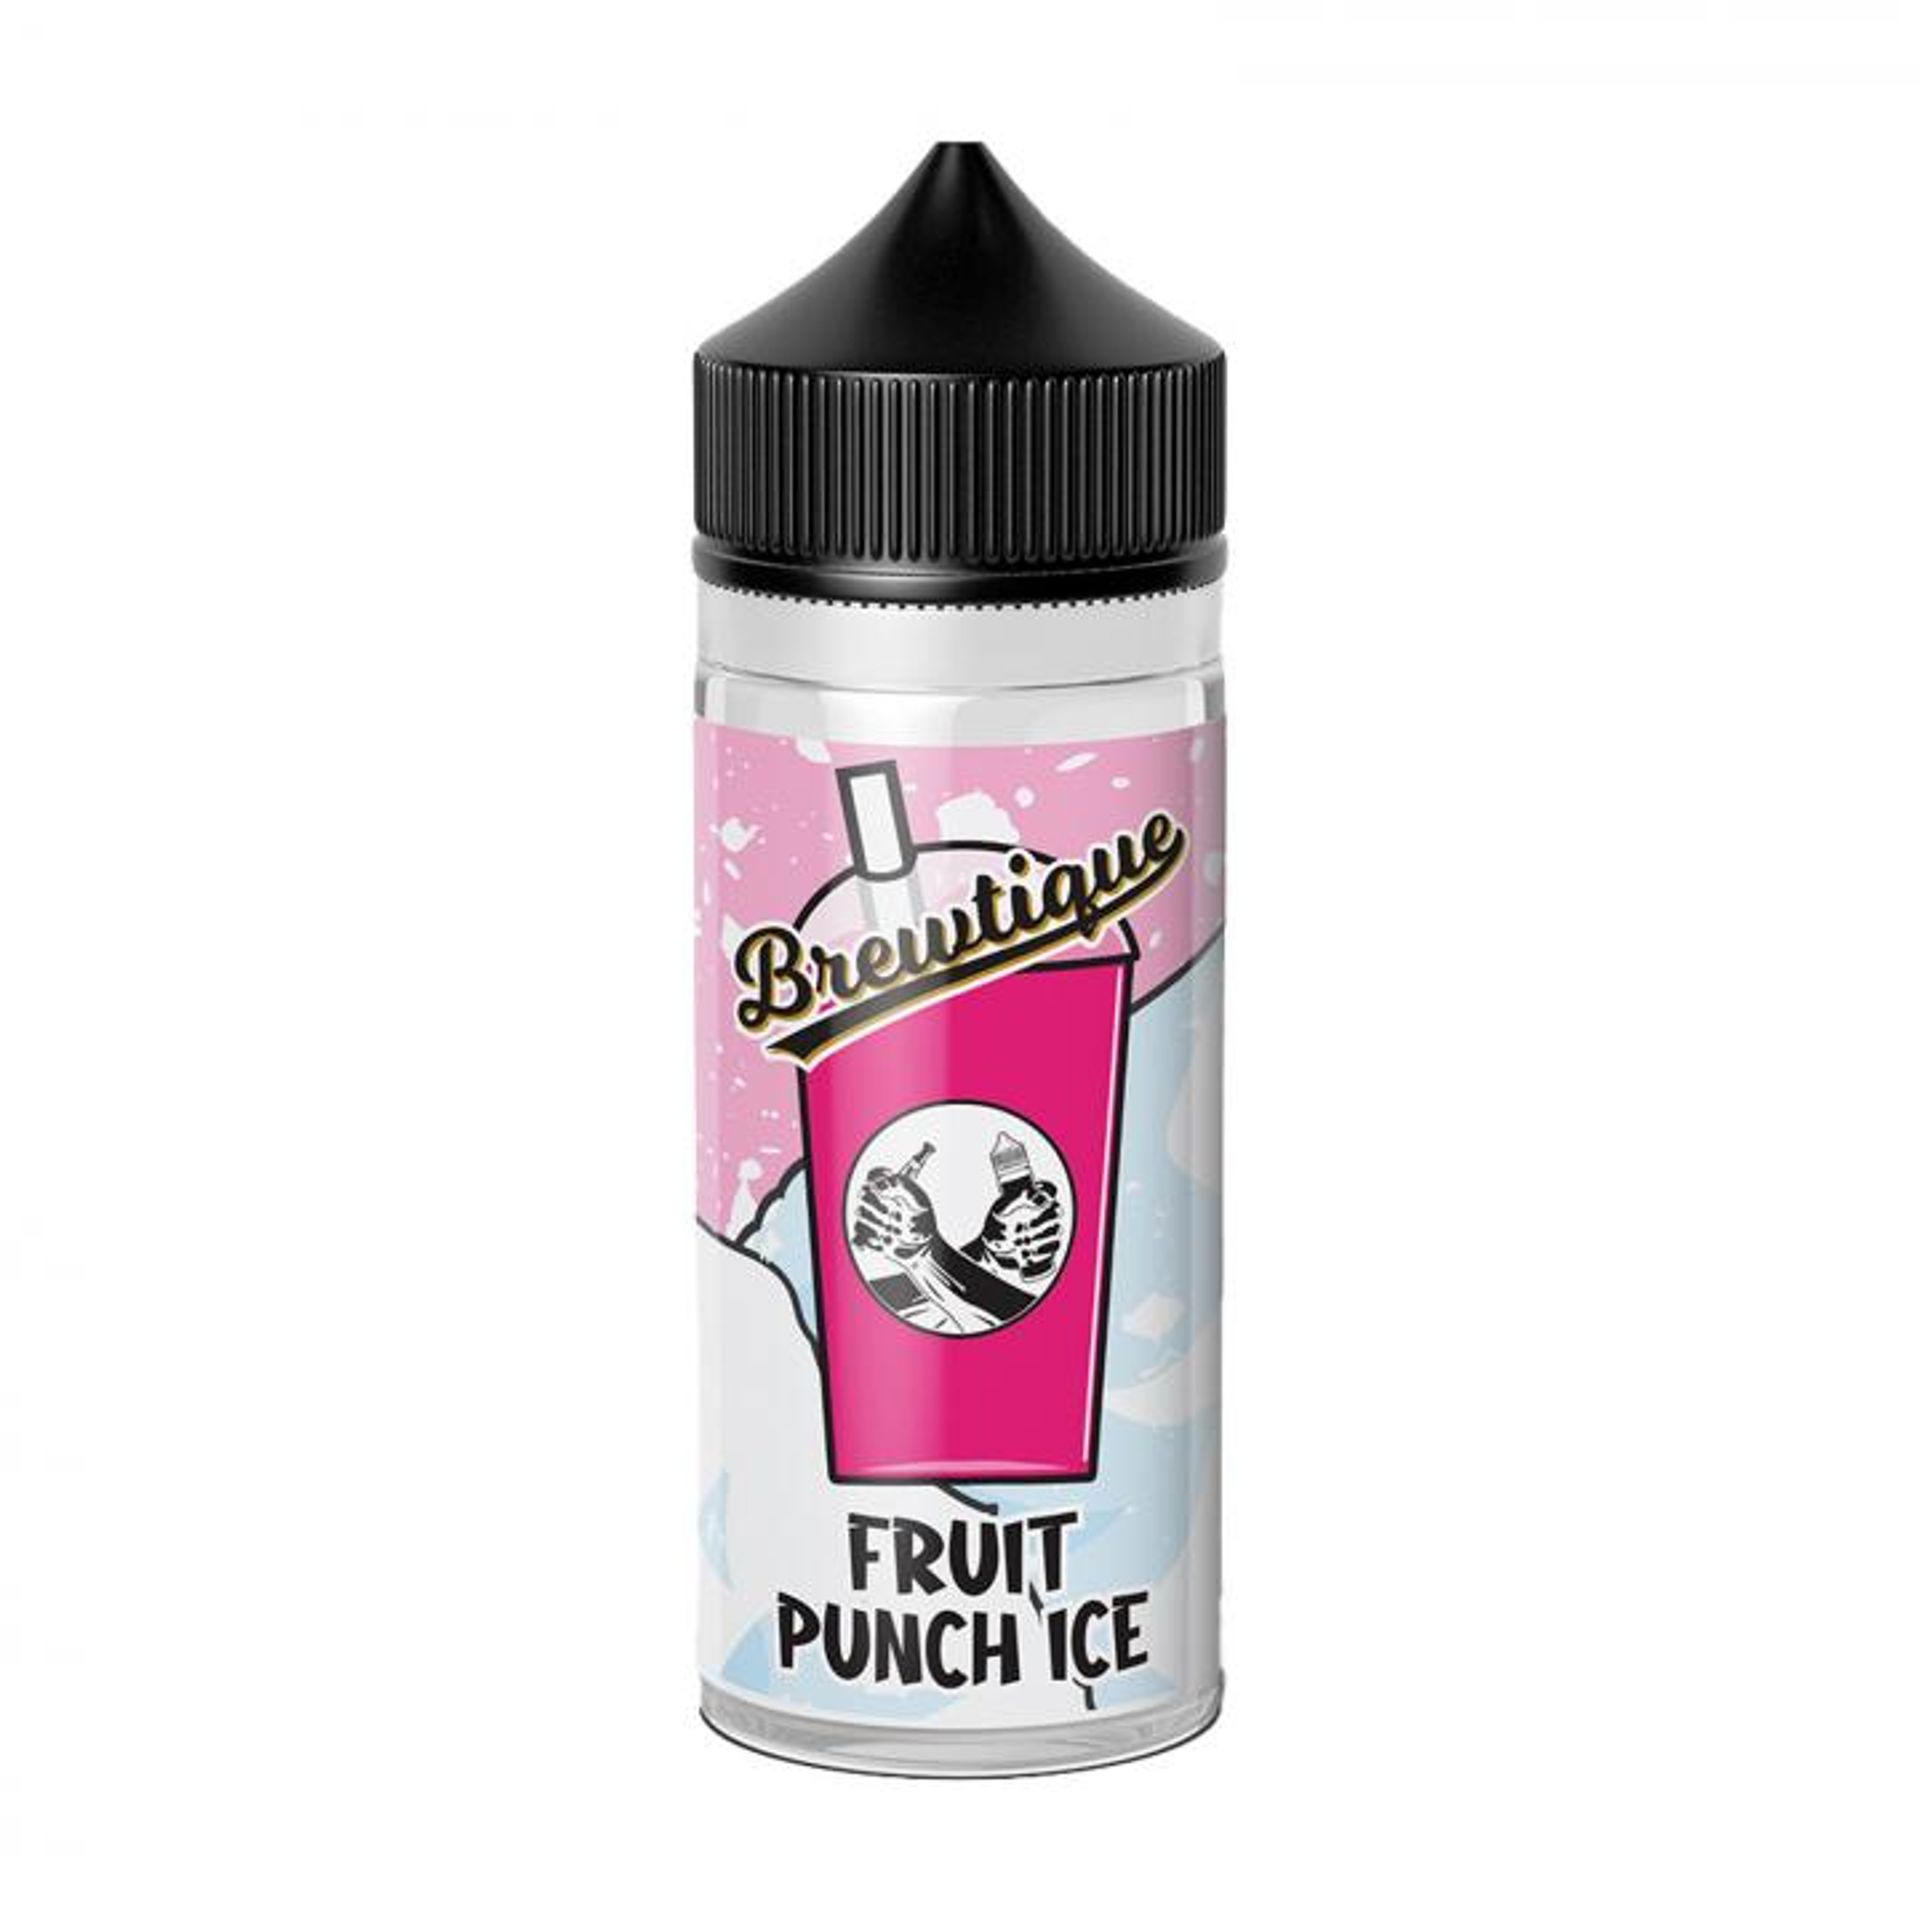 Image of Fruit Punch Ice by Brewtique